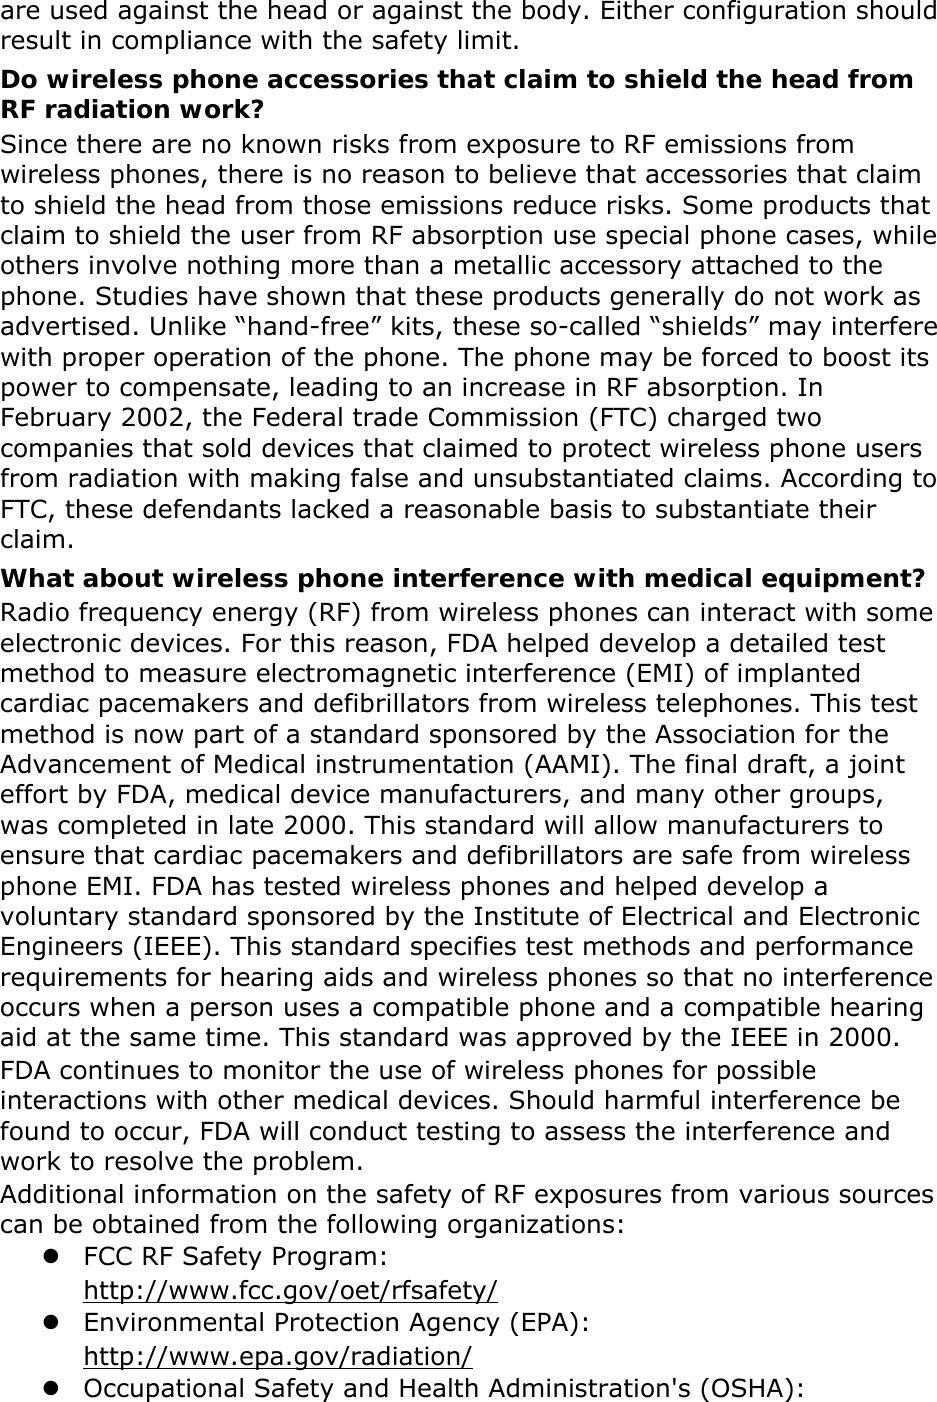 are used against the head or against the body. Either configuration should result in compliance with the safety limit. Do wireless phone accessories that claim to shield the head from RF radiation work? Since there are no known risks from exposure to RF emissions from wireless phones, there is no reason to believe that accessories that claim to shield the head from those emissions reduce risks. Some products that claim to shield the user from RF absorption use special phone cases, while others involve nothing more than a metallic accessory attached to the phone. Studies have shown that these products generally do not work as advertised. Unlike “hand-free” kits, these so-called “shields” may interfere with proper operation of the phone. The phone may be forced to boost its power to compensate, leading to an increase in RF absorption. In February 2002, the Federal trade Commission (FTC) charged two companies that sold devices that claimed to protect wireless phone users from radiation with making false and unsubstantiated claims. According to FTC, these defendants lacked a reasonable basis to substantiate their claim. What about wireless phone interference with medical equipment? Radio frequency energy (RF) from wireless phones can interact with some electronic devices. For this reason, FDA helped develop a detailed test method to measure electromagnetic interference (EMI) of implanted cardiac pacemakers and defibrillators from wireless telephones. This test method is now part of a standard sponsored by the Association for the Advancement of Medical instrumentation (AAMI). The final draft, a joint effort by FDA, medical device manufacturers, and many other groups, was completed in late 2000. This standard will allow manufacturers to ensure that cardiac pacemakers and defibrillators are safe from wireless phone EMI. FDA has tested wireless phones and helped develop a voluntary standard sponsored by the Institute of Electrical and Electronic Engineers (IEEE). This standard specifies test methods and performance requirements for hearing aids and wireless phones so that no interference occurs when a person uses a compatible phone and a compatible hearing aid at the same time. This standard was approved by the IEEE in 2000. FDA continues to monitor the use of wireless phones for possible interactions with other medical devices. Should harmful interference be found to occur, FDA will conduct testing to assess the interference and work to resolve the problem. Additional information on the safety of RF exposures from various sources can be obtained from the following organizations:  FCC RF Safety Program:  http://www.fcc.gov/oet/rfsafety/  Environmental Protection Agency (EPA):  http://www.epa.gov/radiation/  Occupational Safety and Health Administration&apos;s (OSHA):   